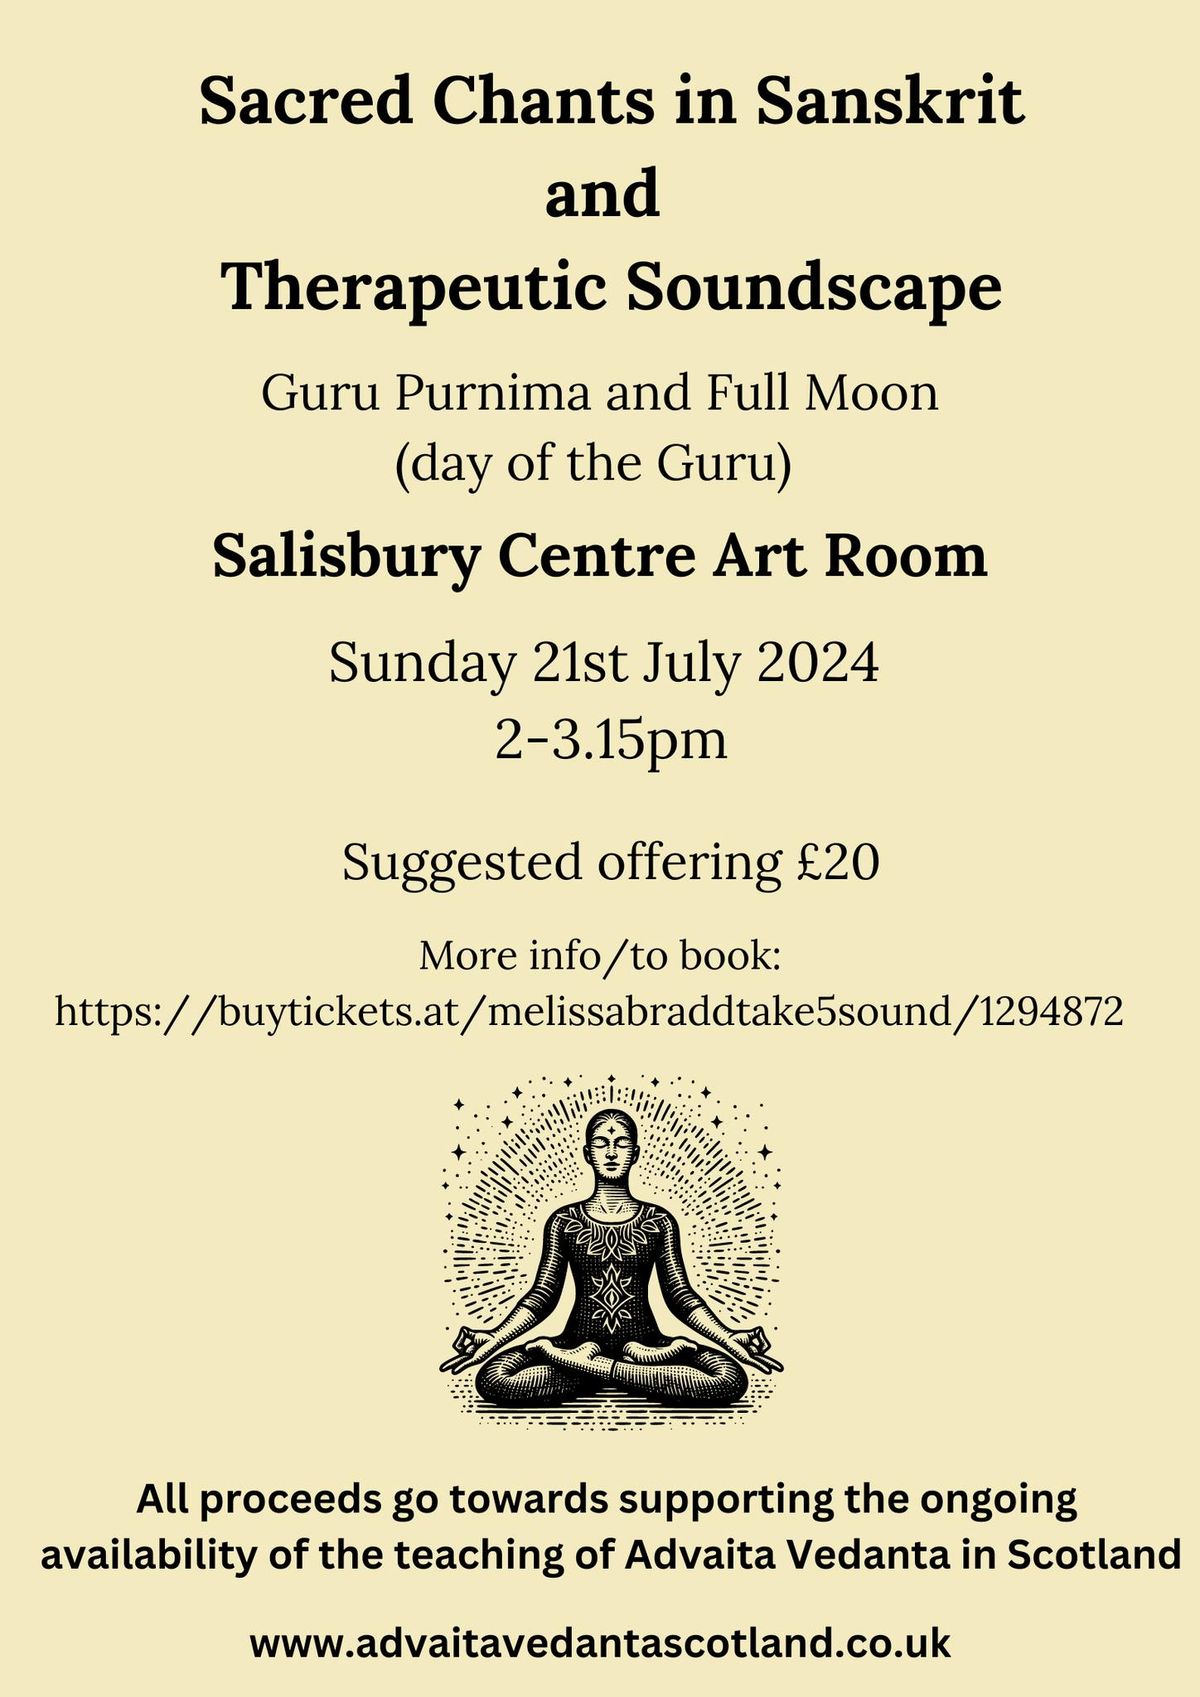 Sacred Chants in Sanskrit and Therapeutic Soundscape